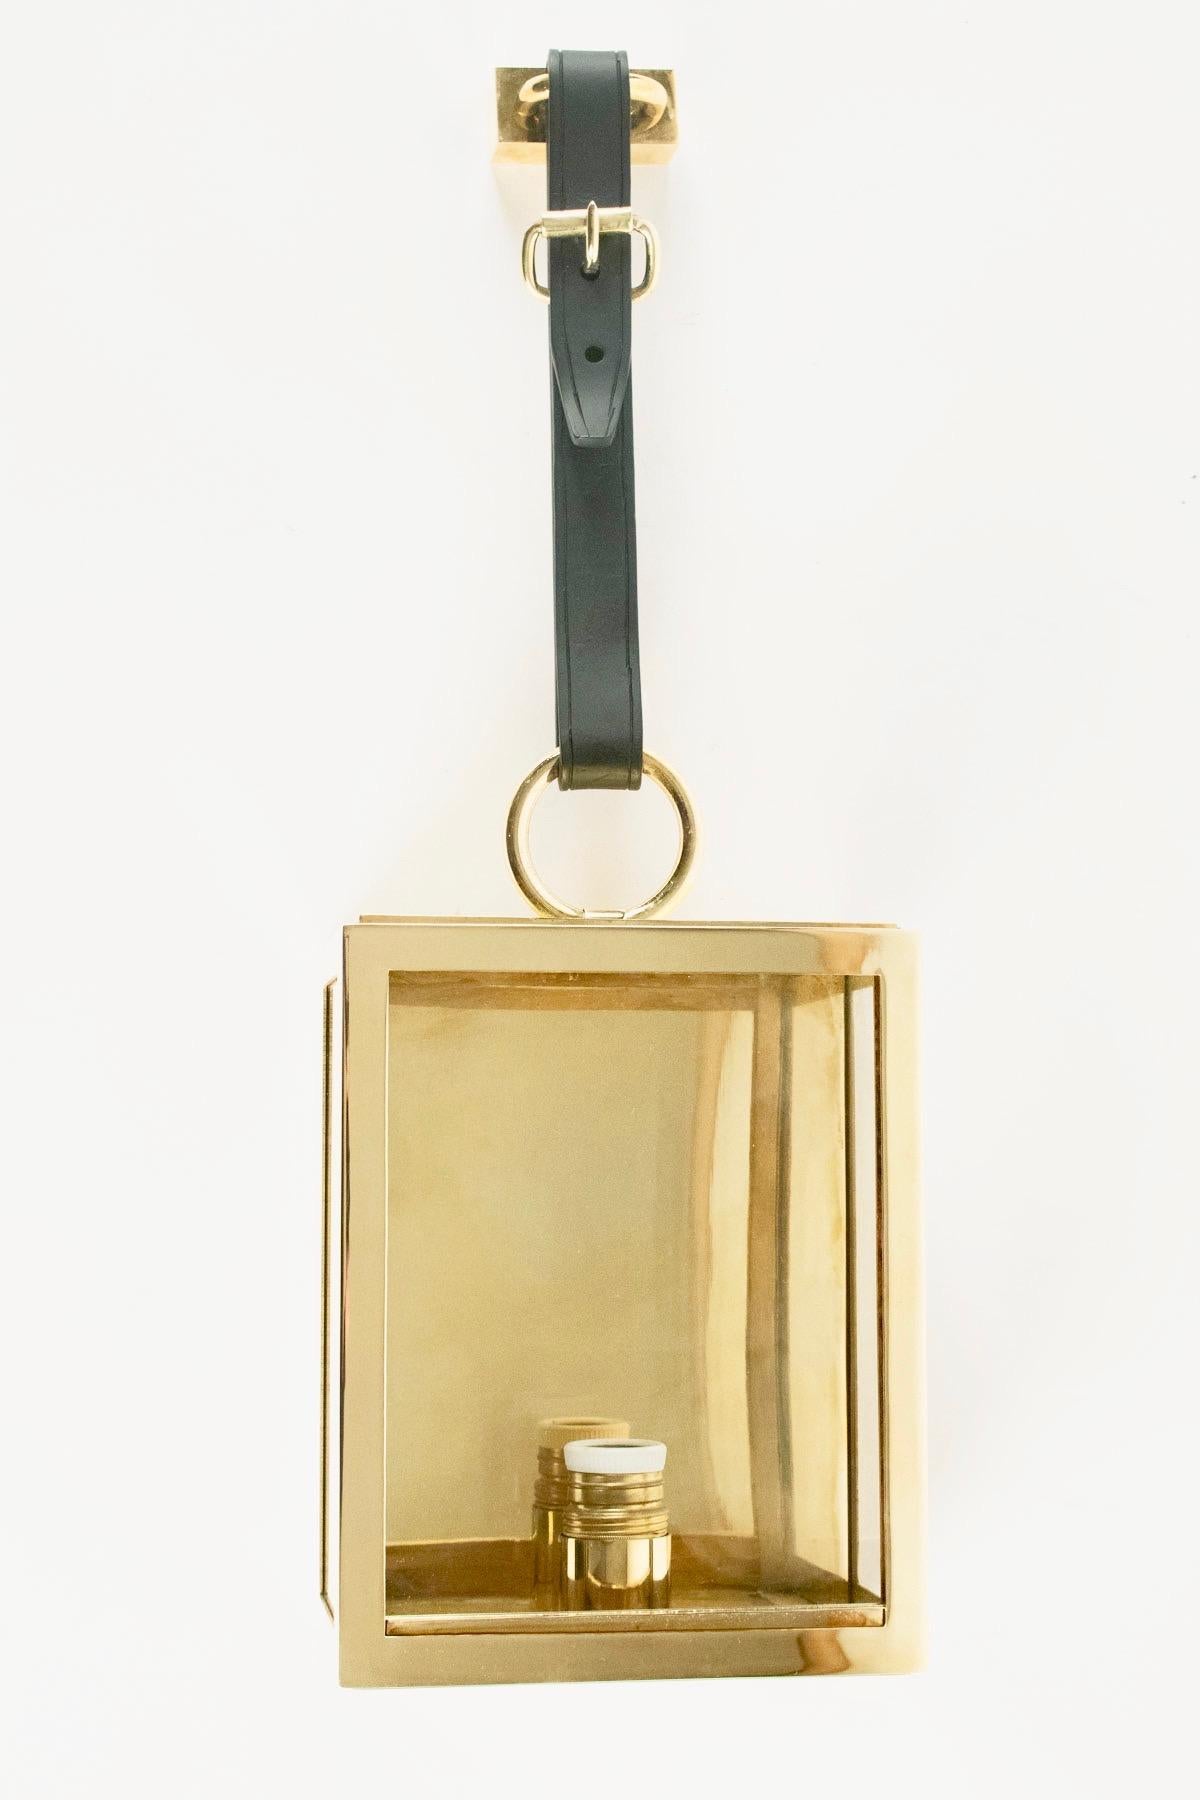 Each sconce consists of a polished gilded brass box with 3 glass windows and one ring on the top.
The lanterns are hanged with wrought iron strip that imitates a leather belt with a brass buckle.

One bulb per sconce.